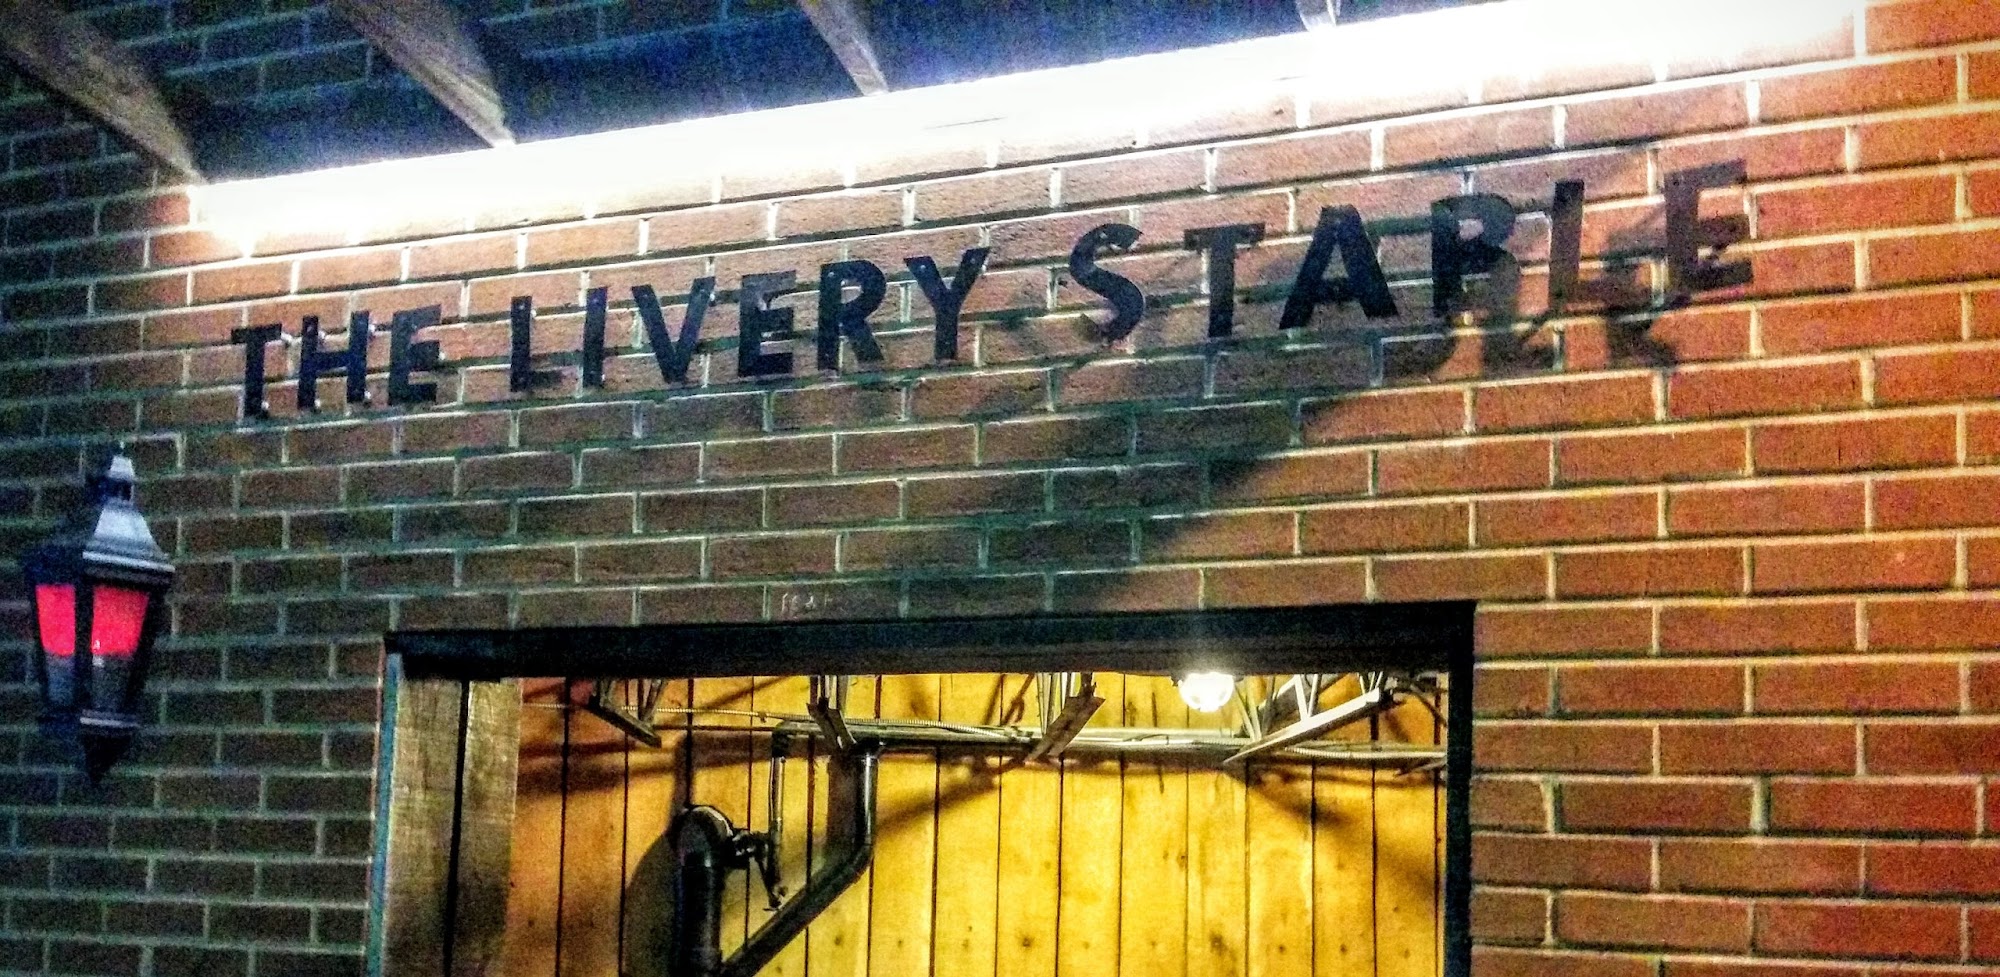 The Livery Stable (LWs)